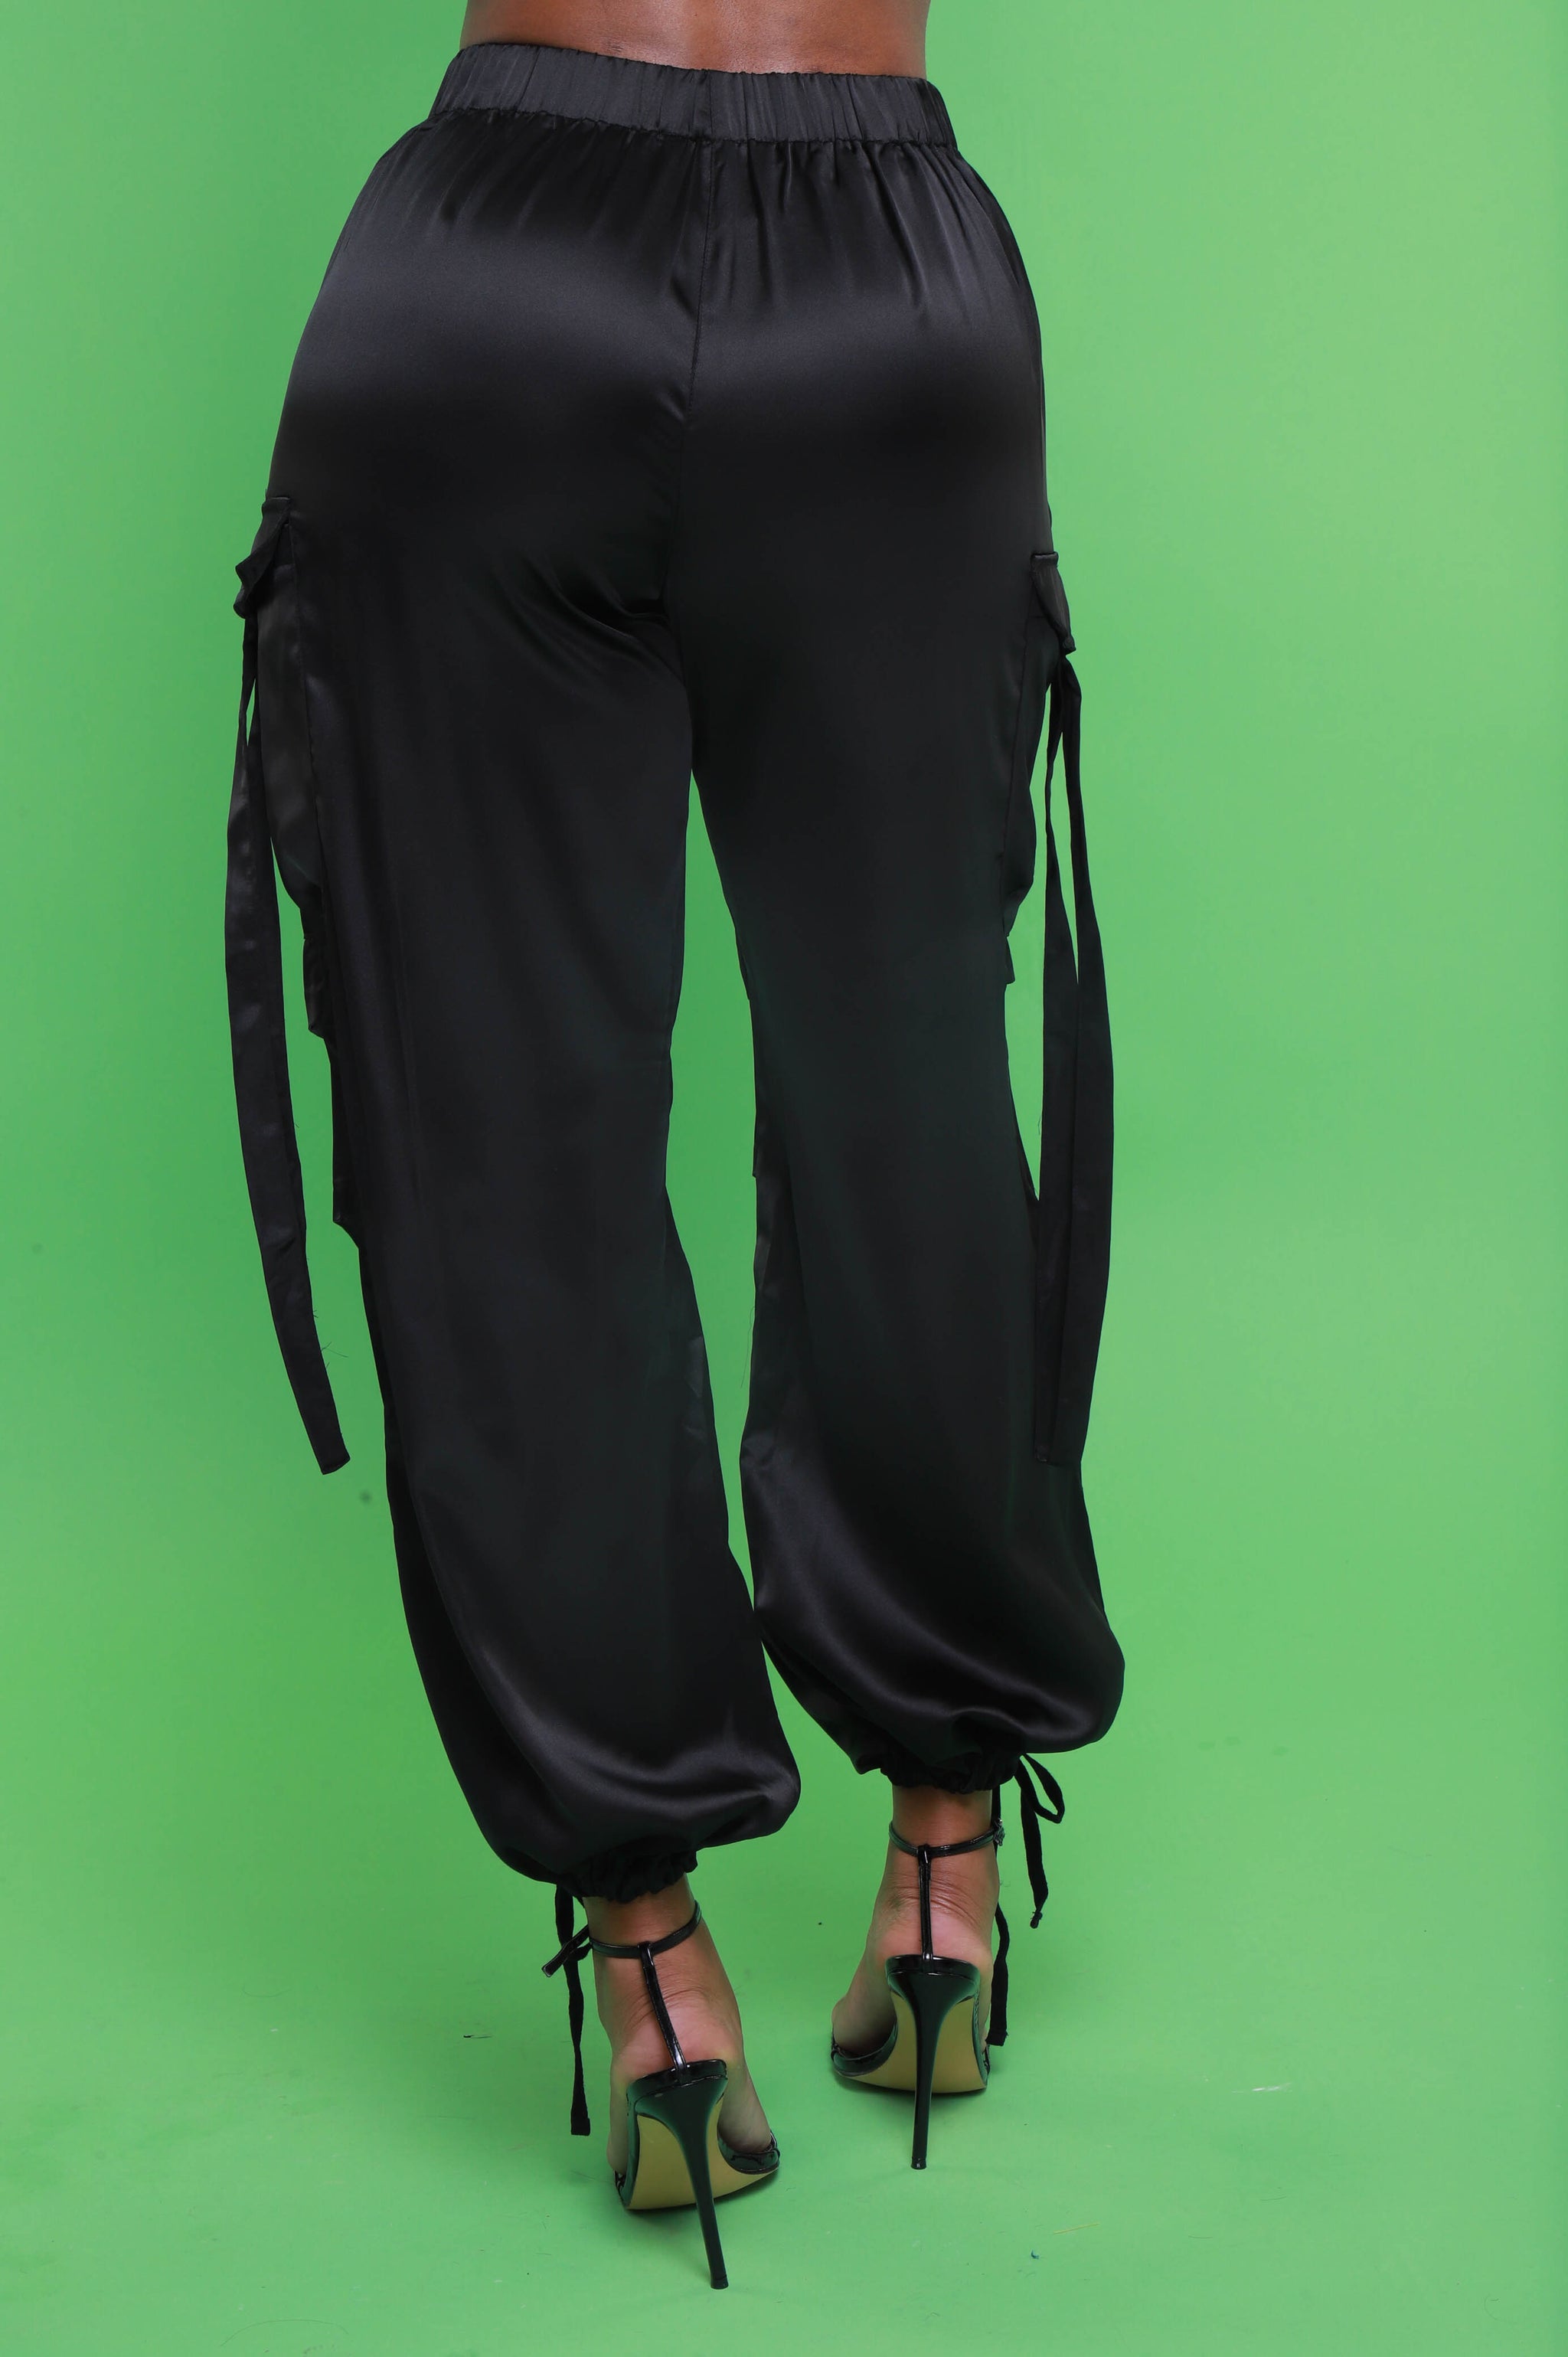 Free People, Pants & Jumpsuits, Free People Nwt Cozy All Day Harem  Leggings Washed Drawstring Black Small New